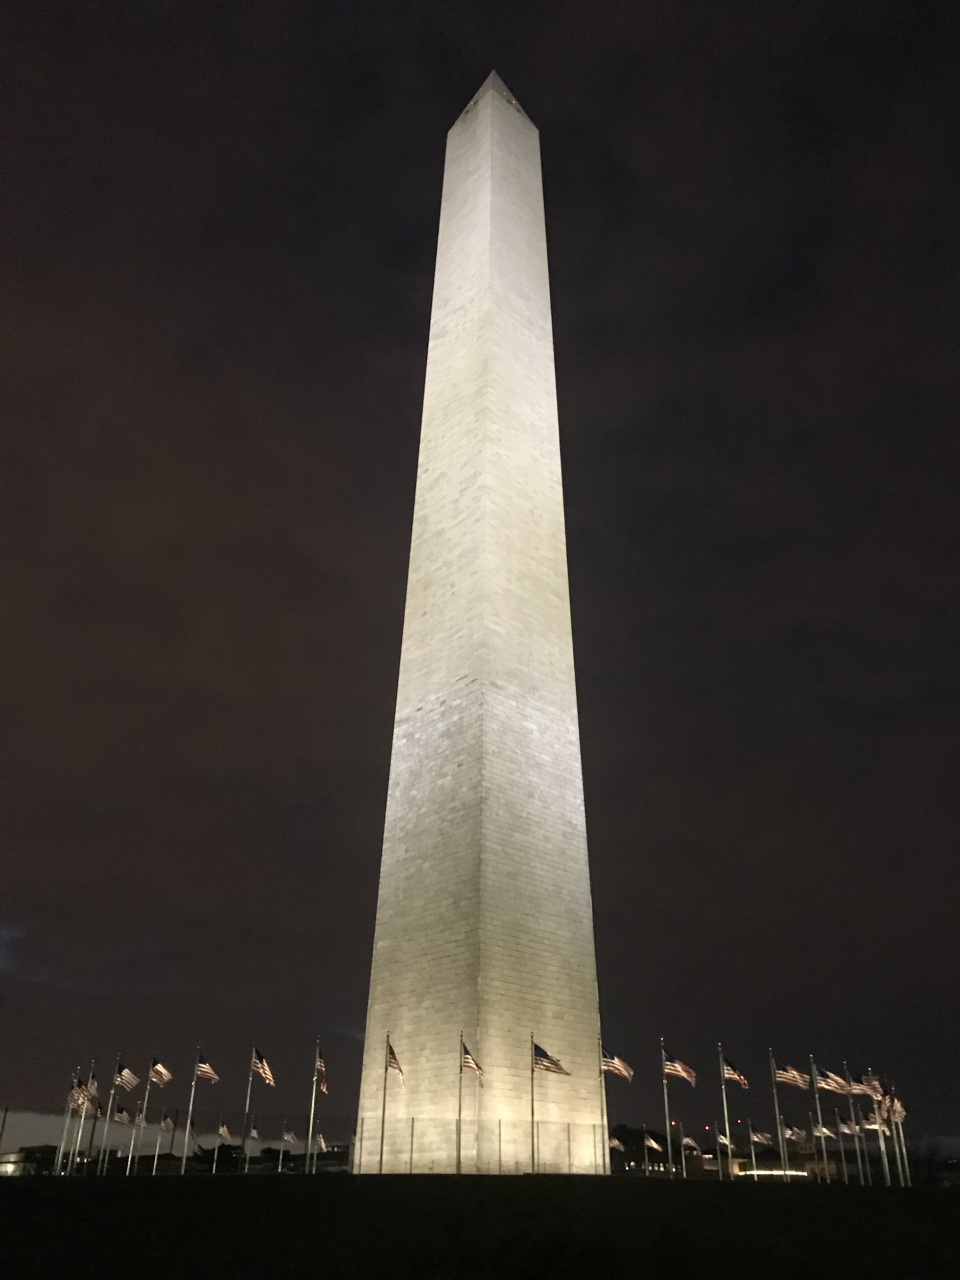 The Washington Monument up close, surrounded by multiple small American flags.